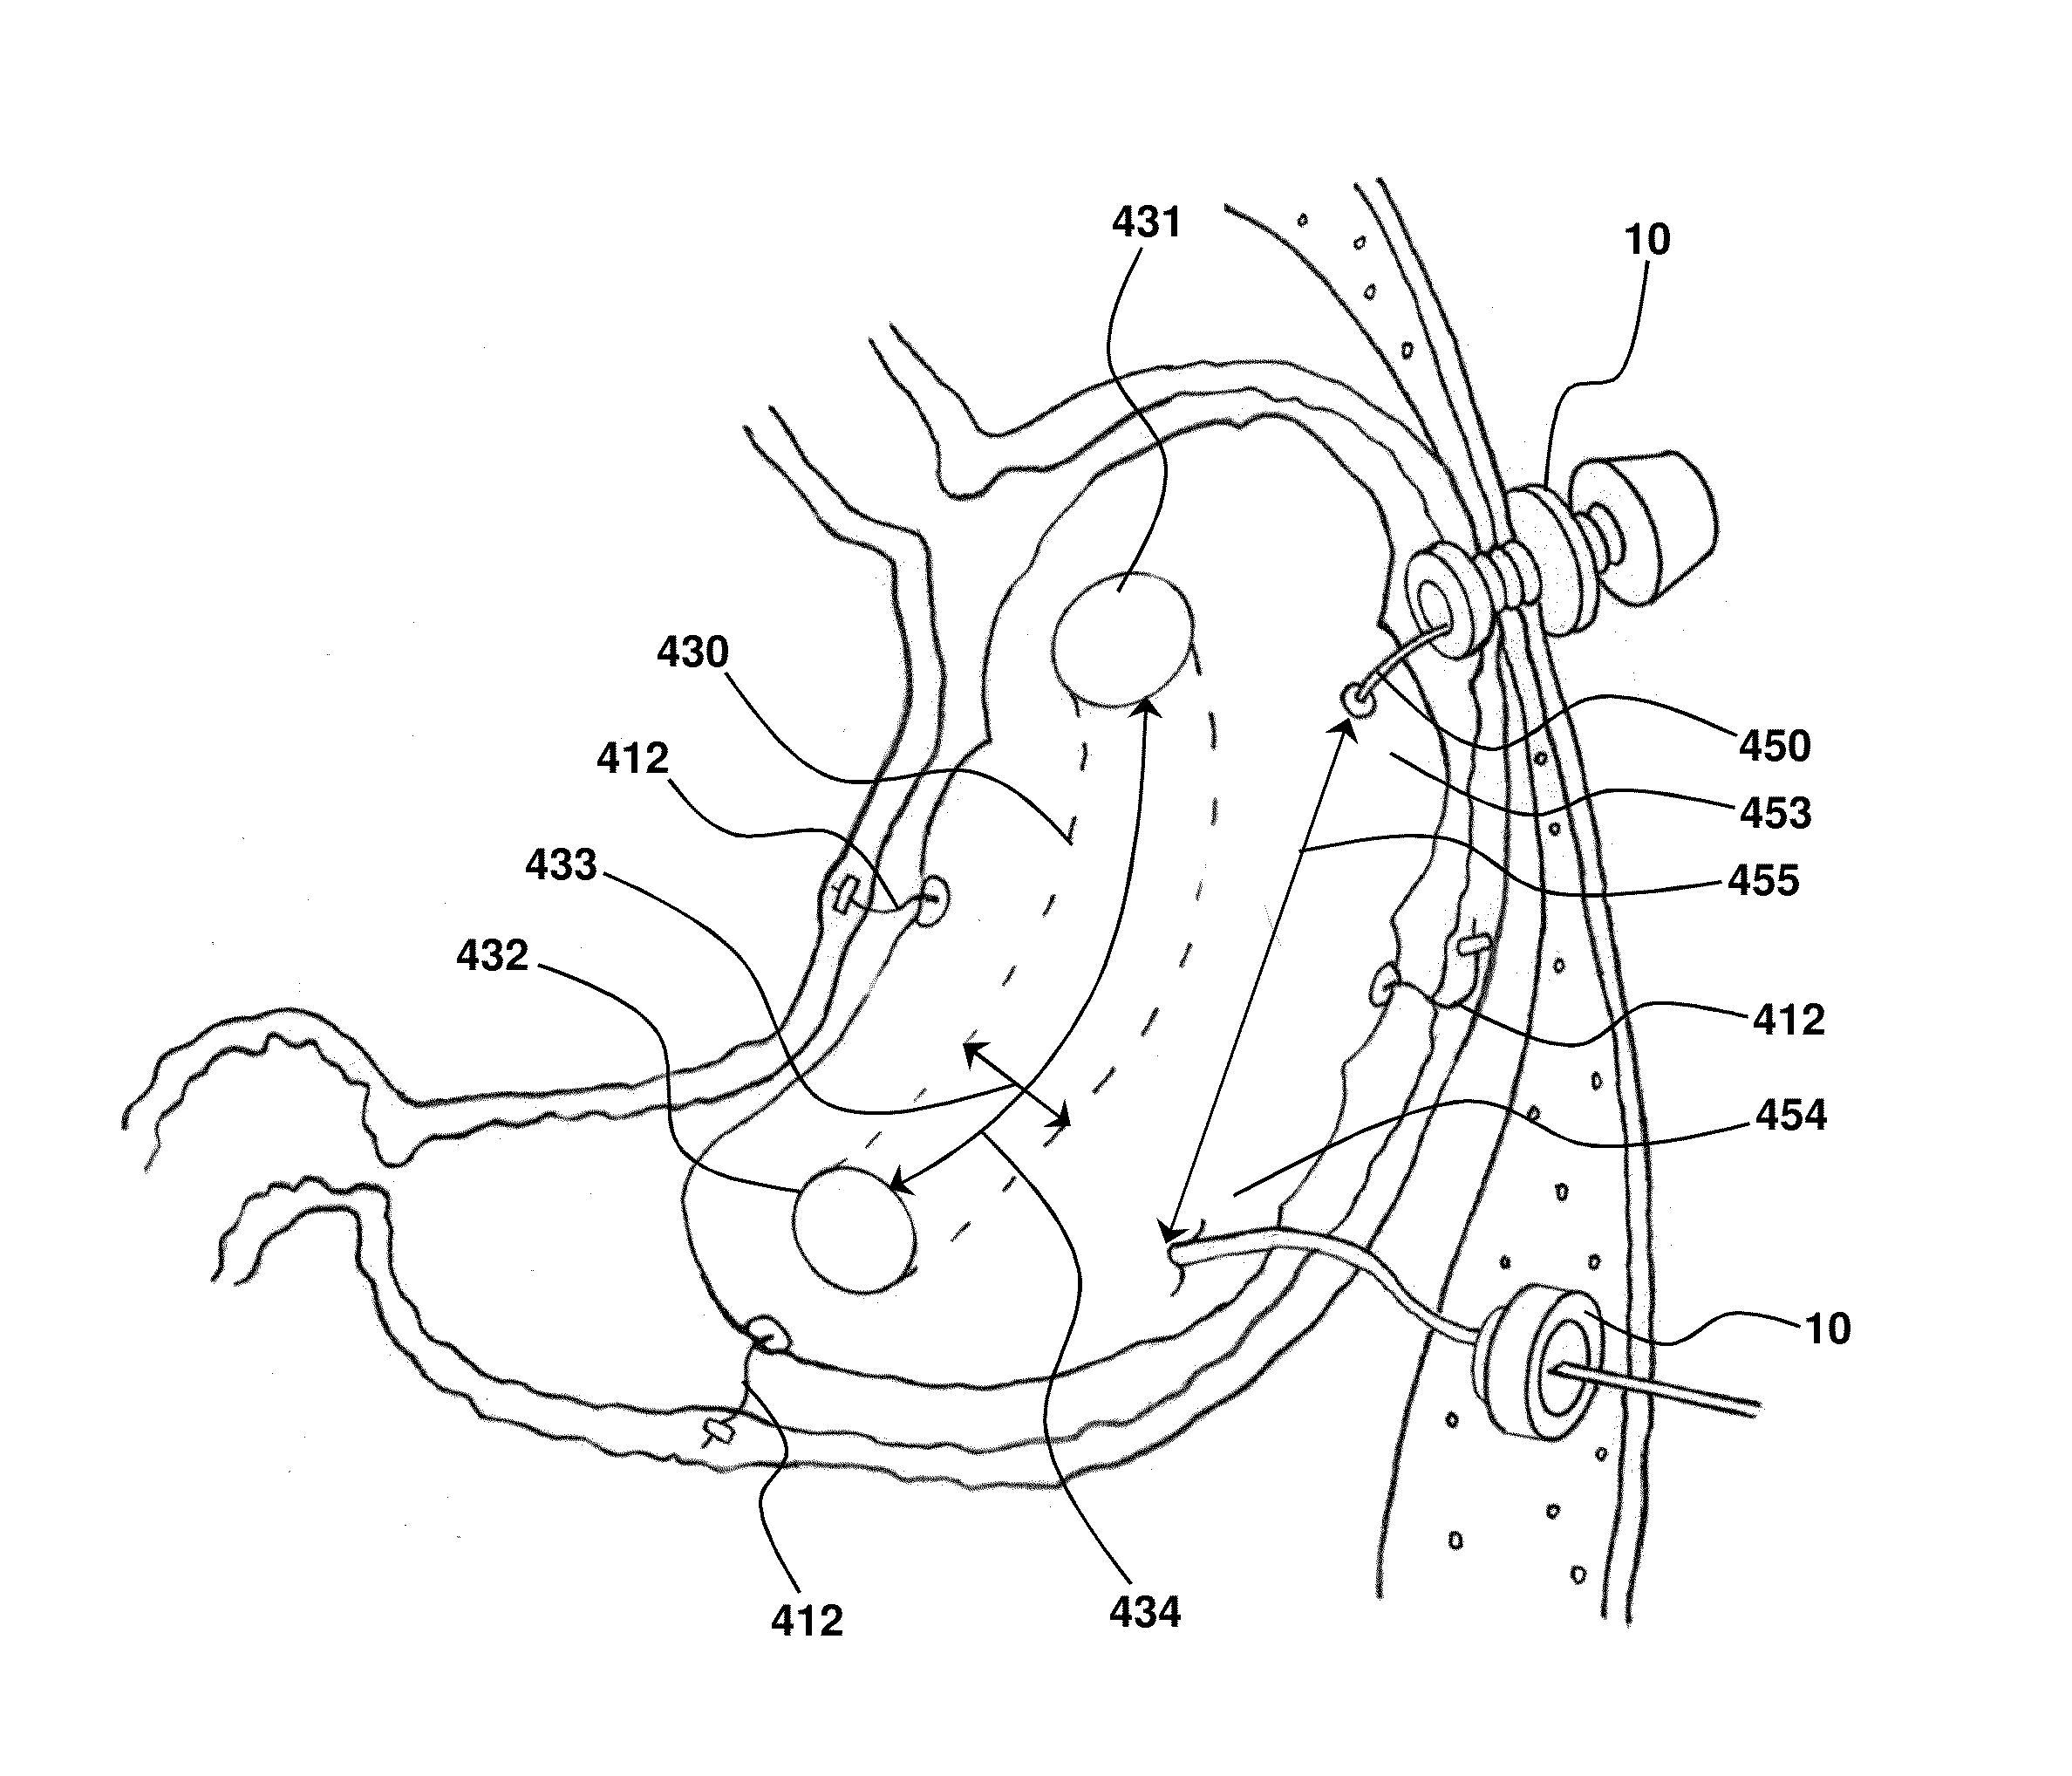 Anchorable size-varying gastric balloons for weight loss